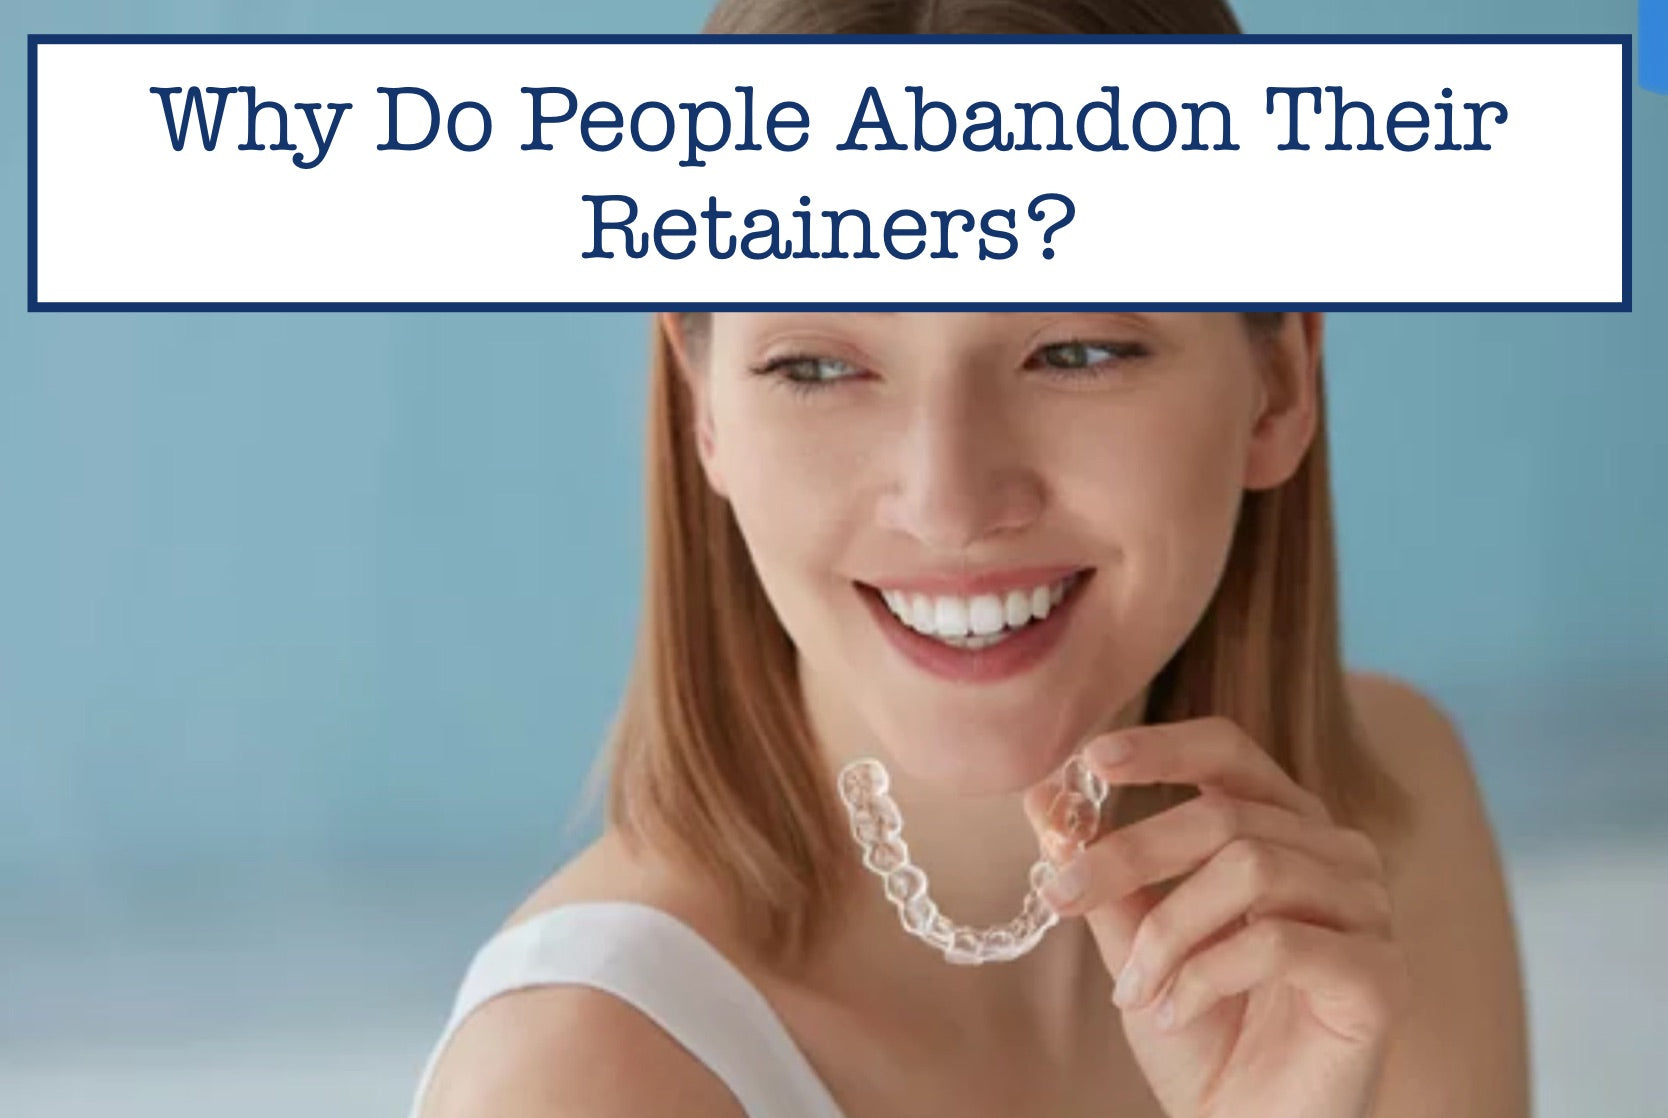 Why Do People Abandon Their Retainers?